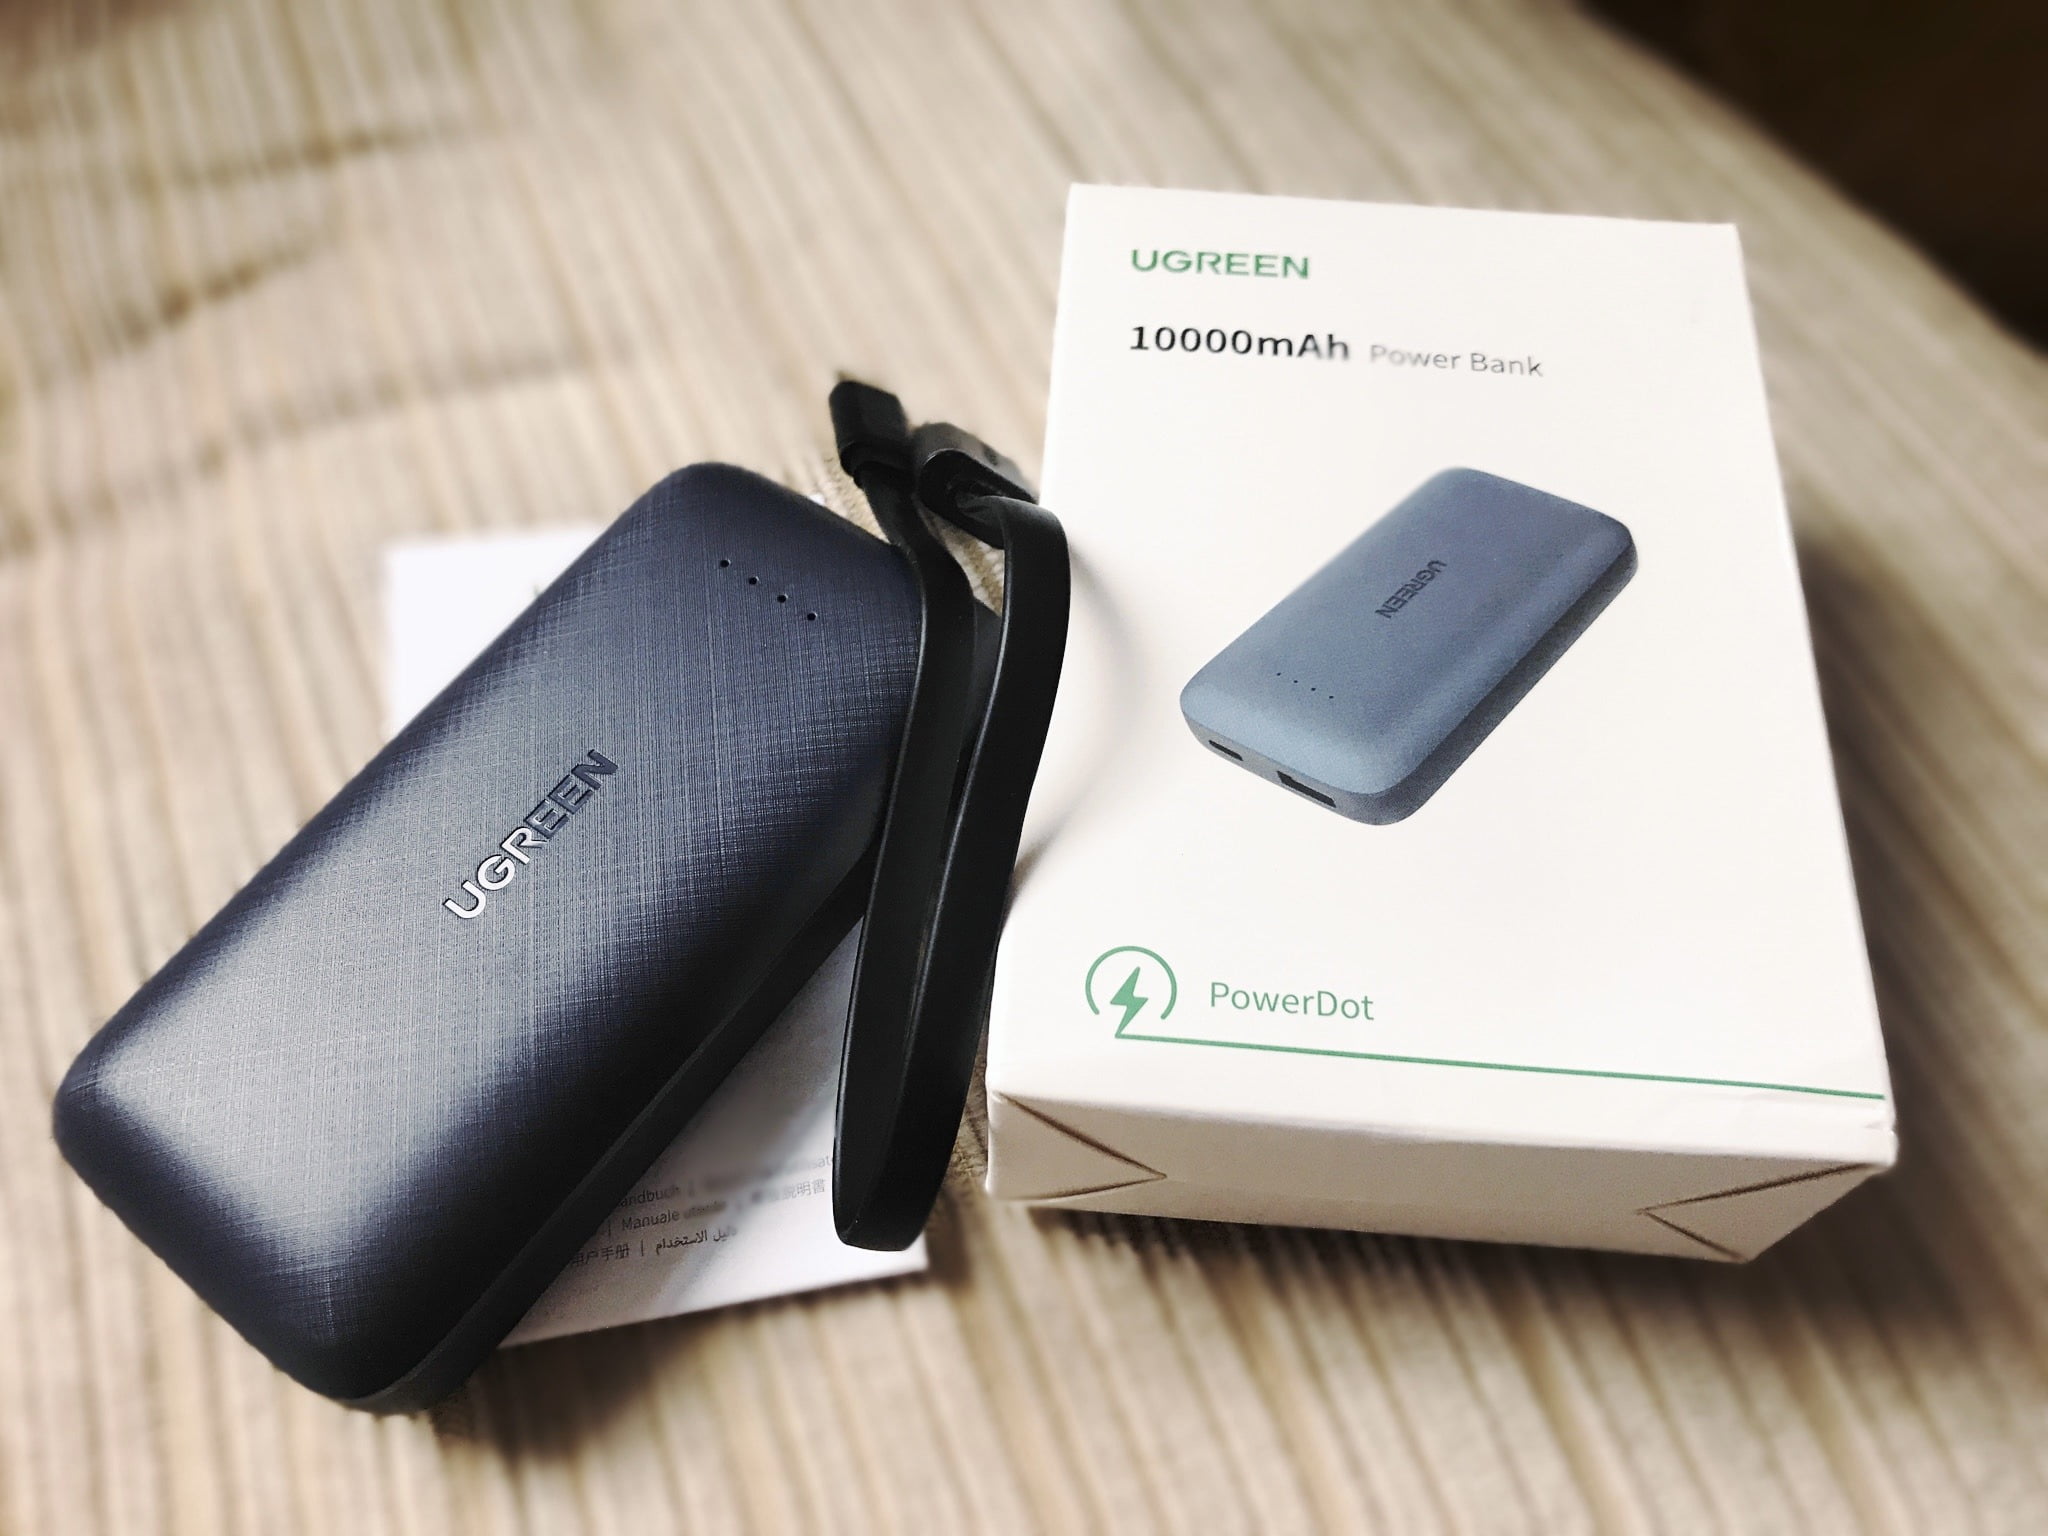 Review: Ugreen USB-C Power Bank with 18 Watts tested